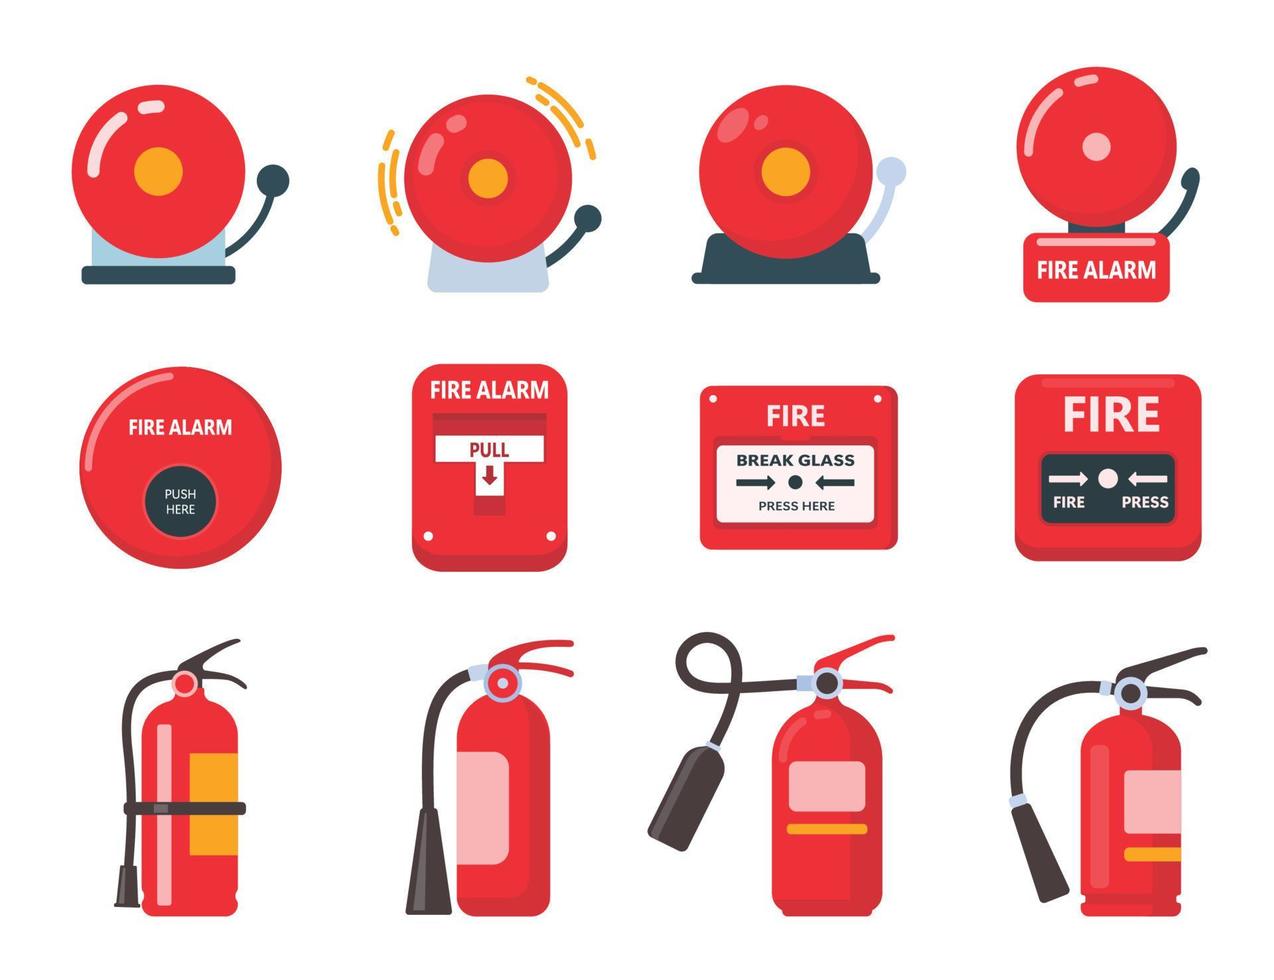 Red fire alarm bell icon. An electric bell sounds to alert you in the event of a fire. vector